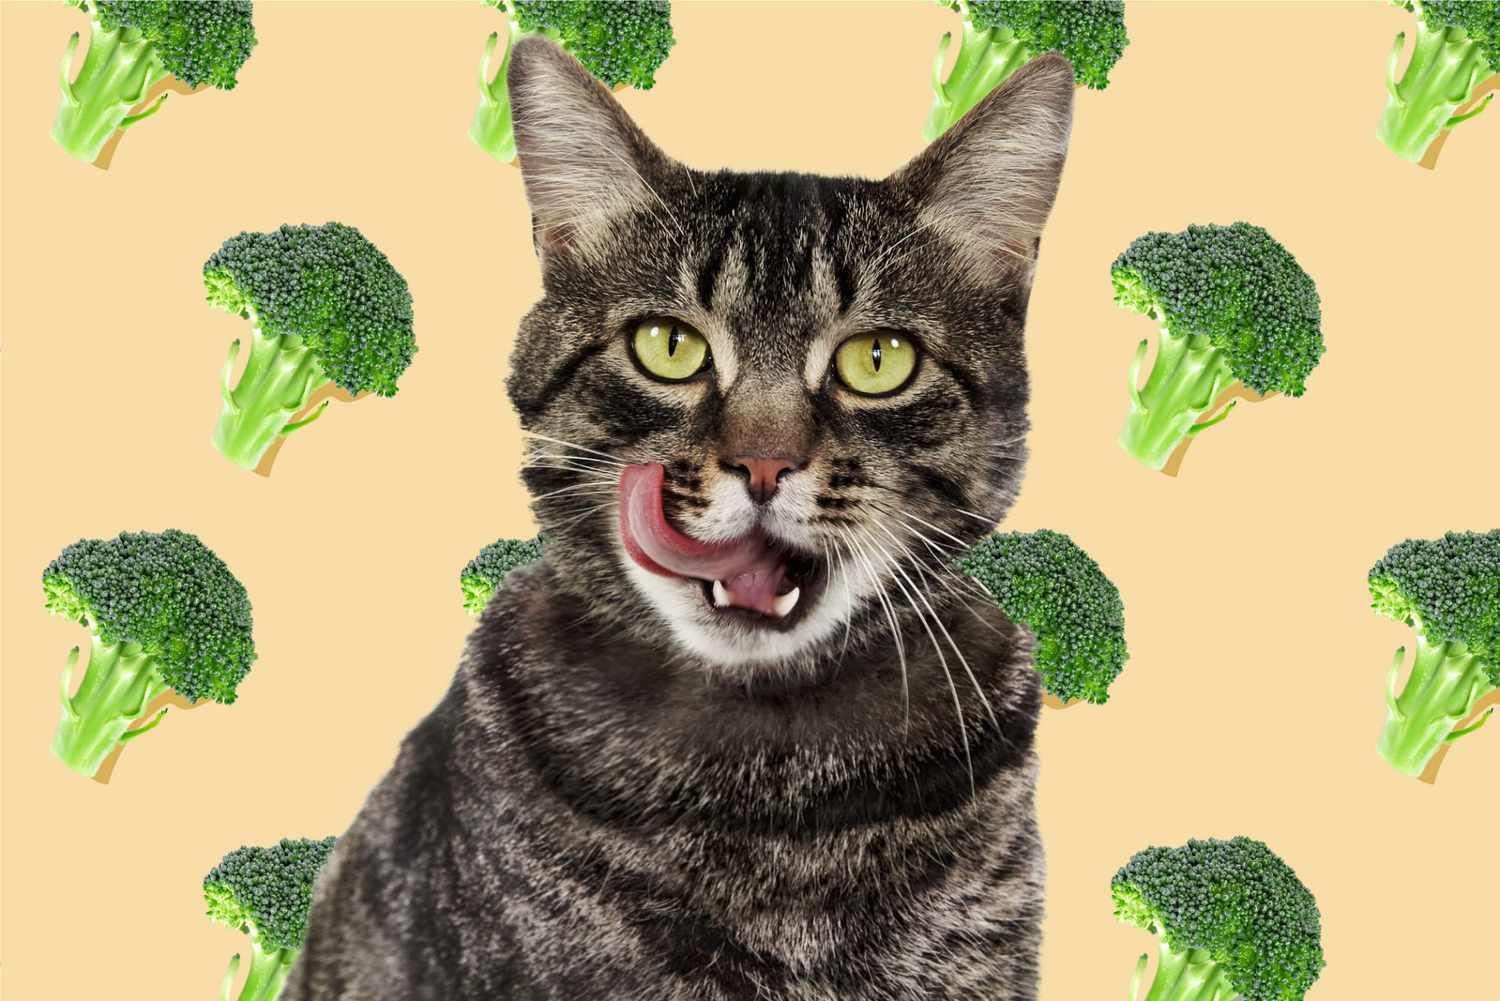 Cat licks lips with illustrated broccoli background